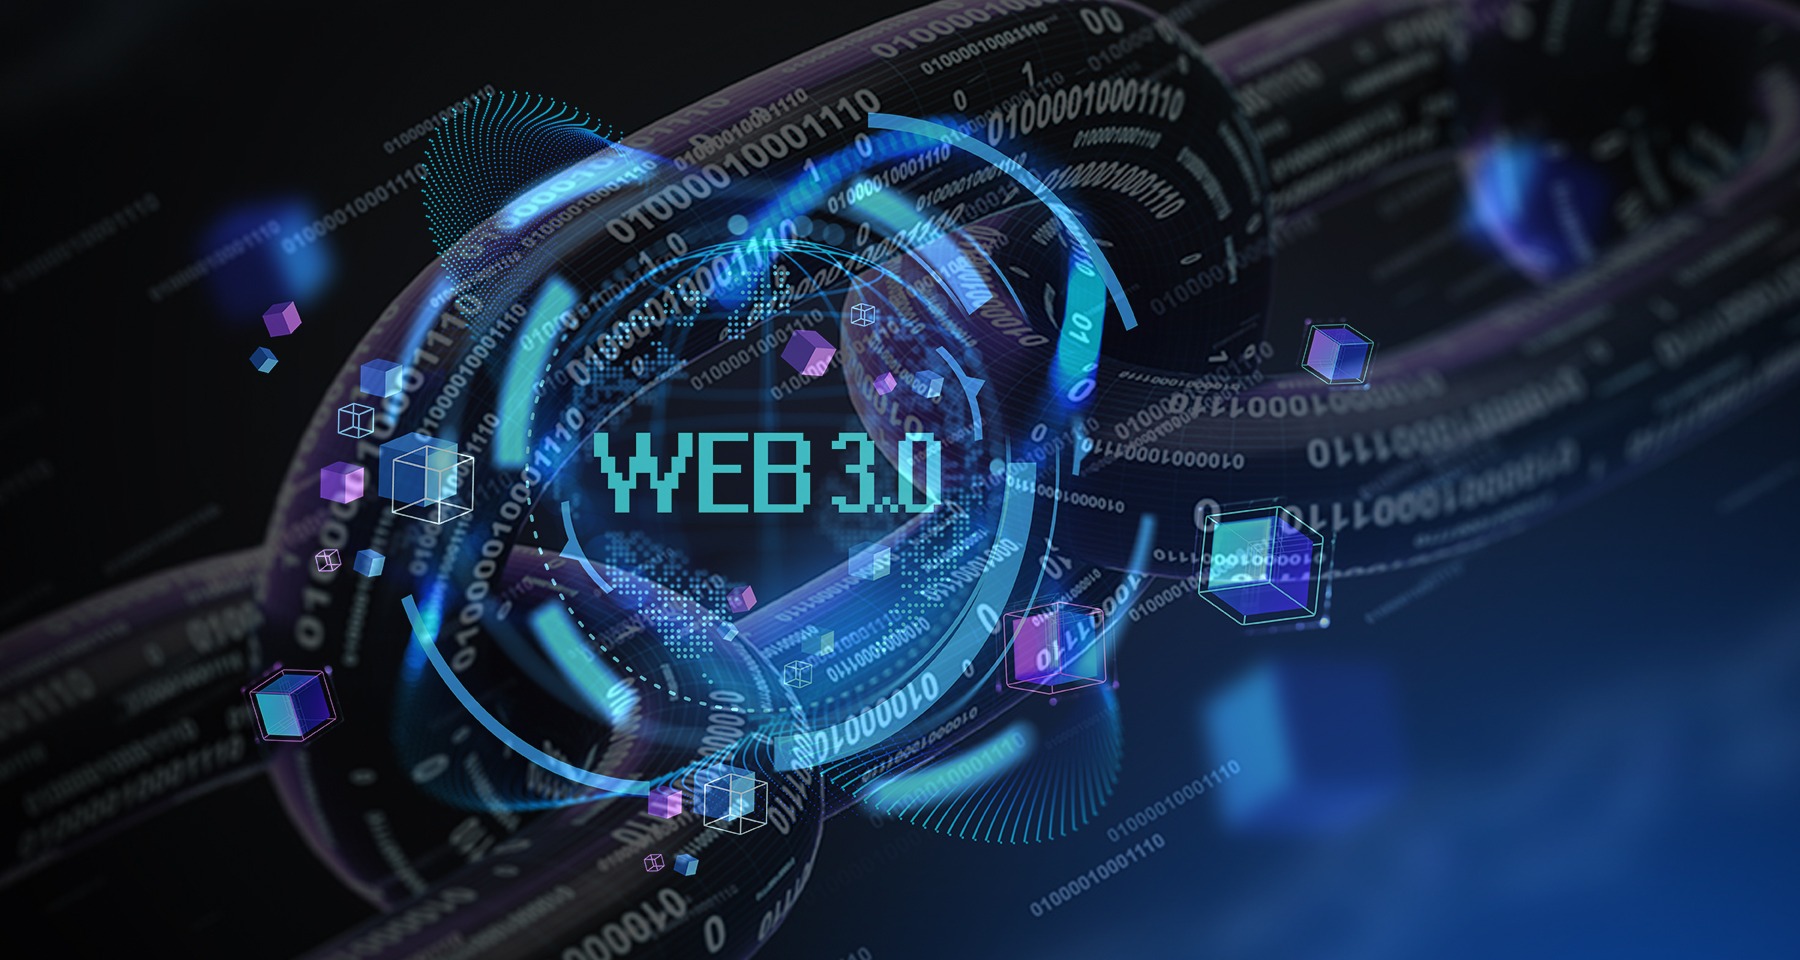 Web3.0 - Decentralizing the Future of the Internet with Blockchain Technology.